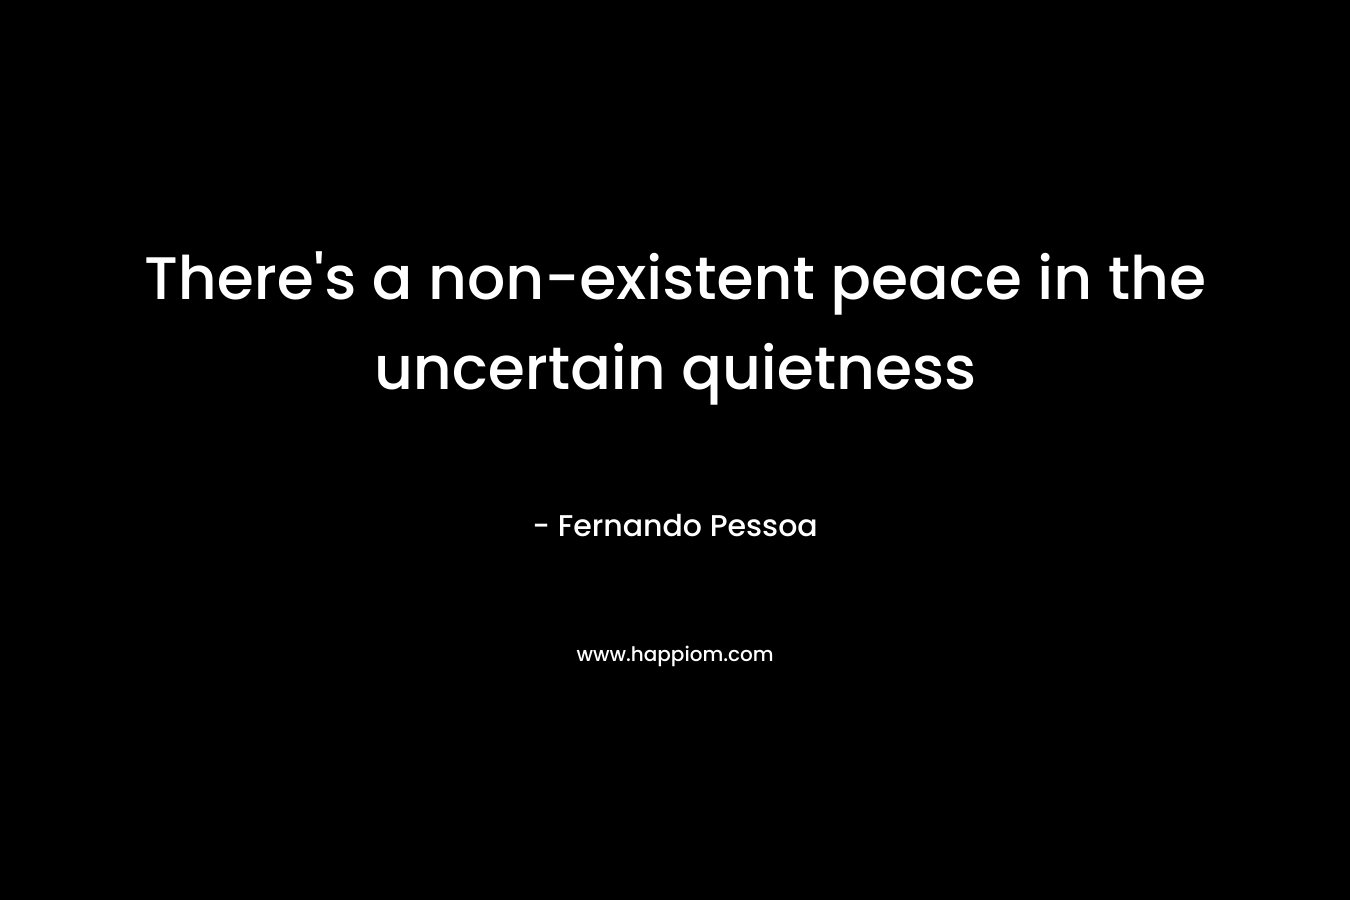 There's a non-existent peace in the uncertain quietness